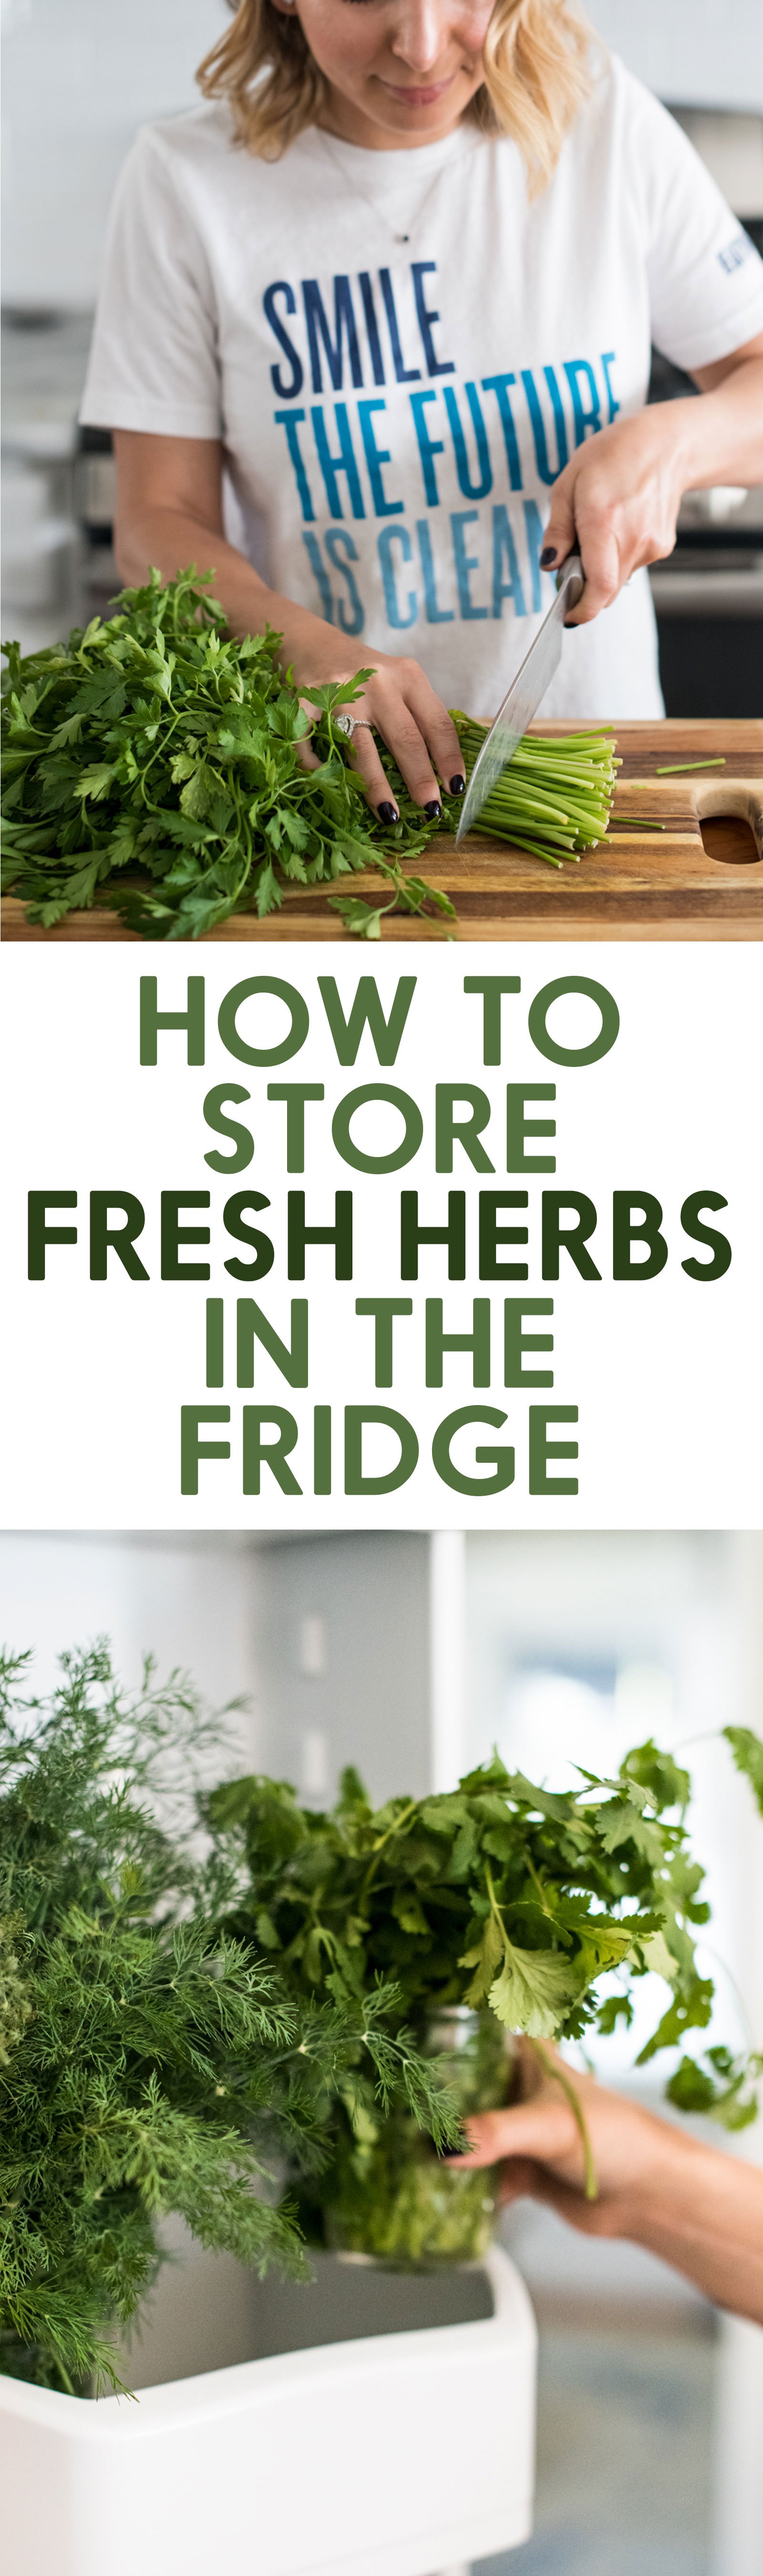 How to Store Fresh Herbs in the Fridge